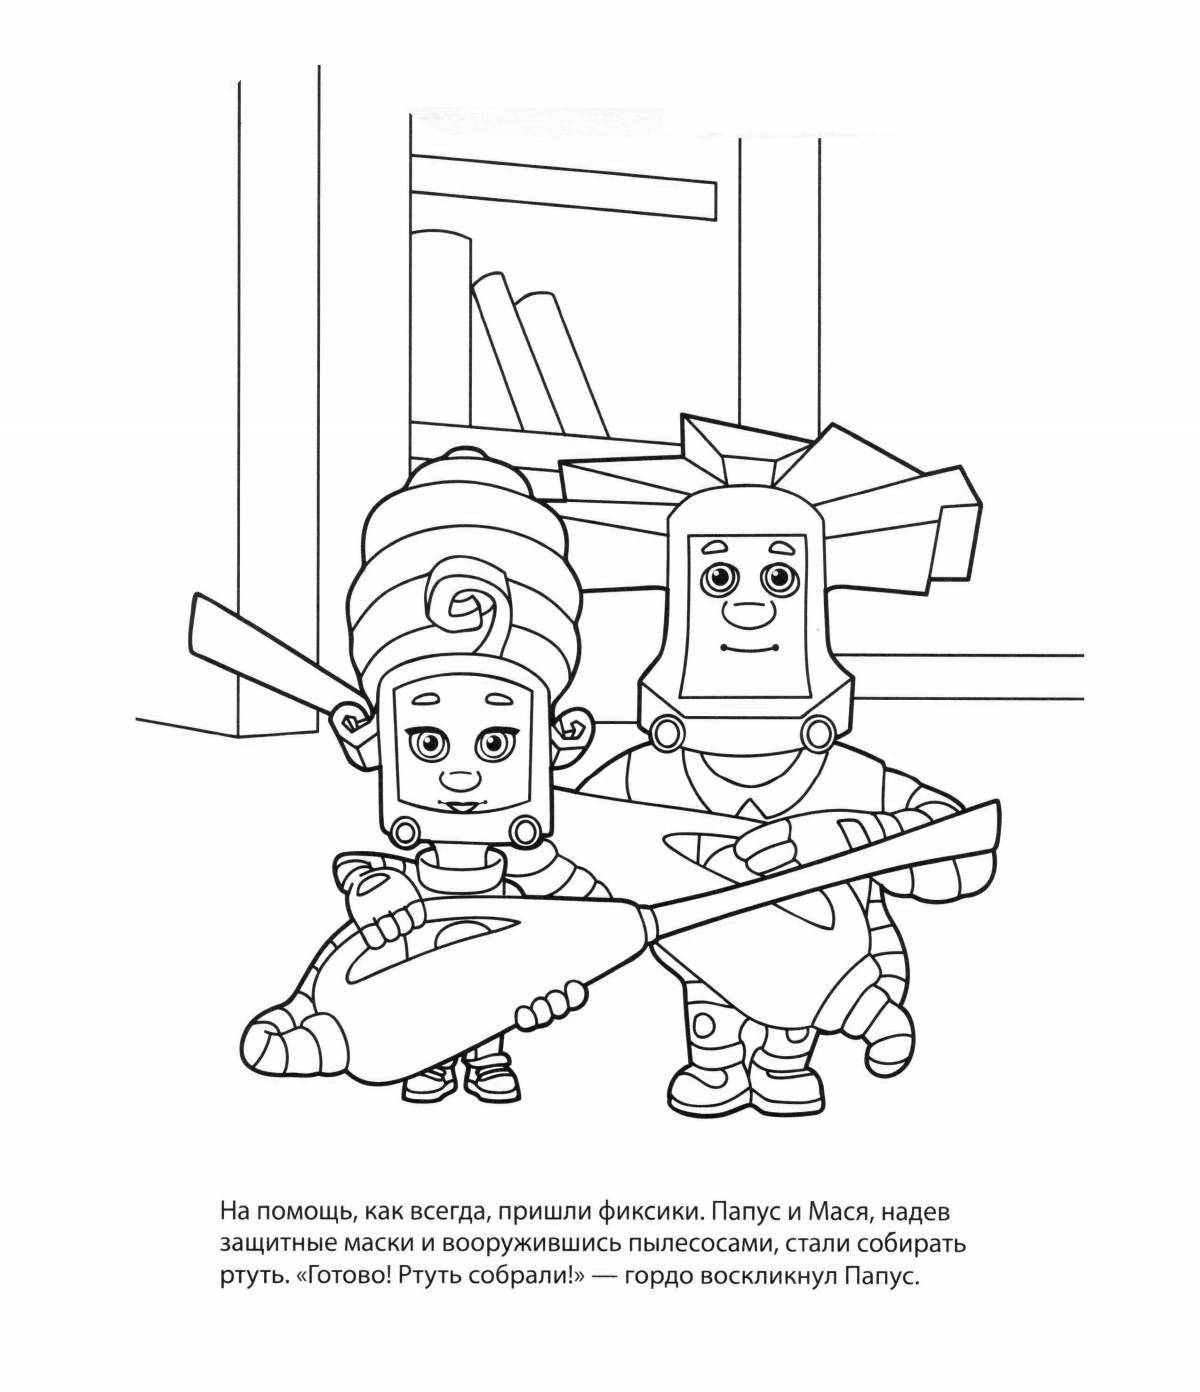 Coloring page fixies magic railway